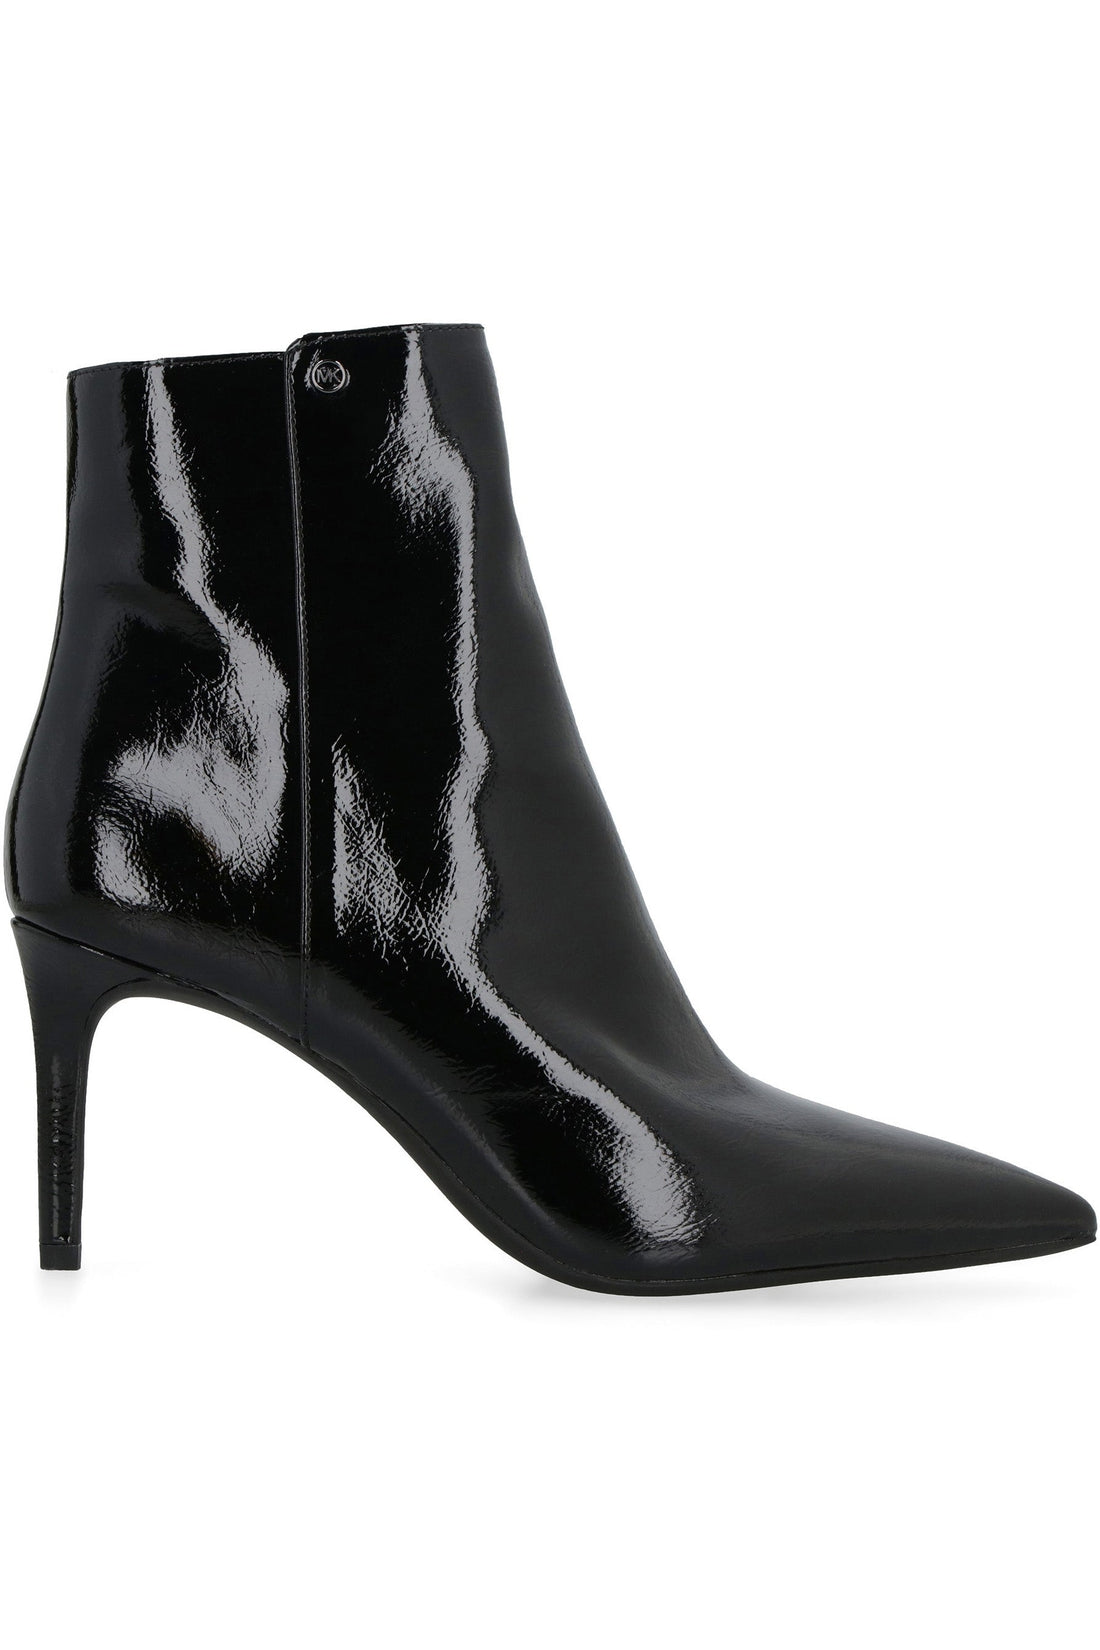 MICHAEL MICHAEL KORS-OUTLET-SALE-Alina patent pointy toe ankle boots-ARCHIVIST